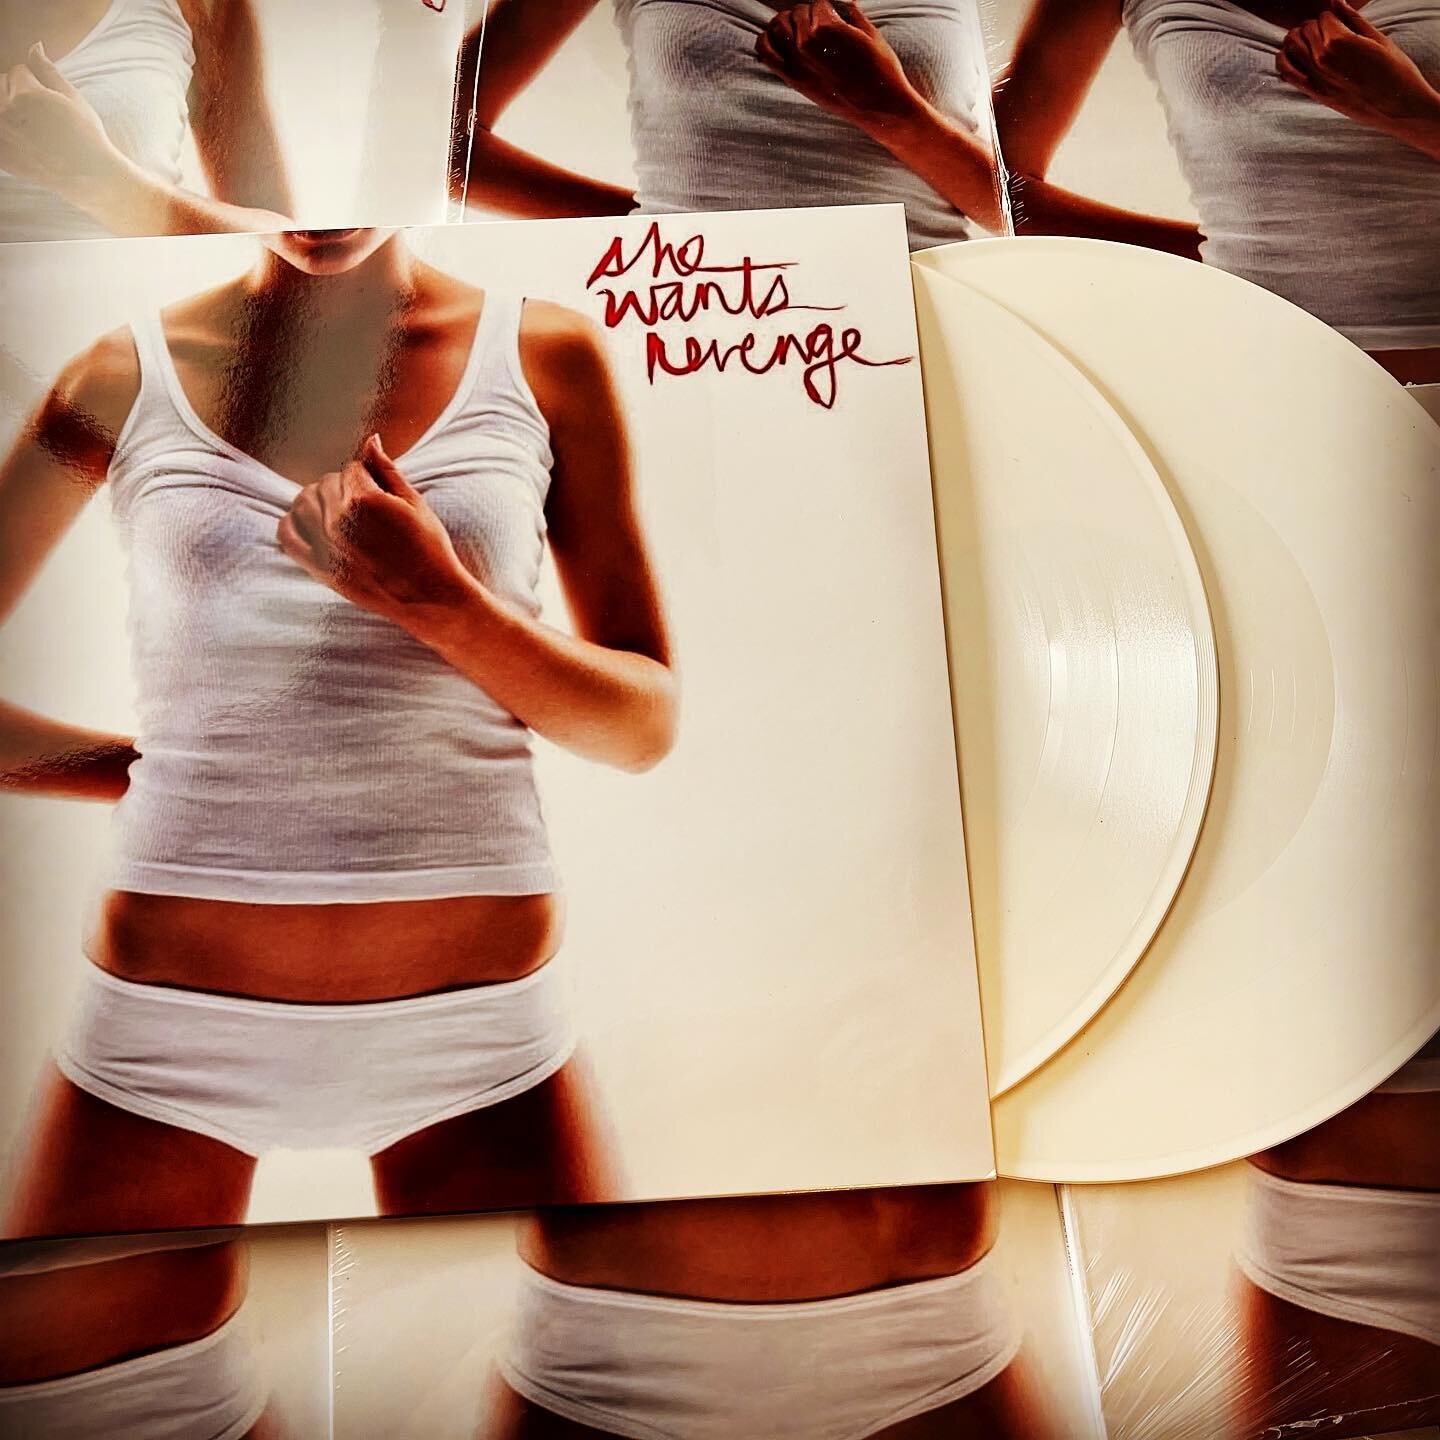 SHE WANTS REVENGE!! Double Lp on white vinyl!  Back in stock now.  Stop by the shop if you&rsquo;re local or PM/Call for mailorder info.  These will not last long!  #shewantsrevenge #goth #coloredvinyl #vinyljunkie #electronicmusic #darkwave #alterna